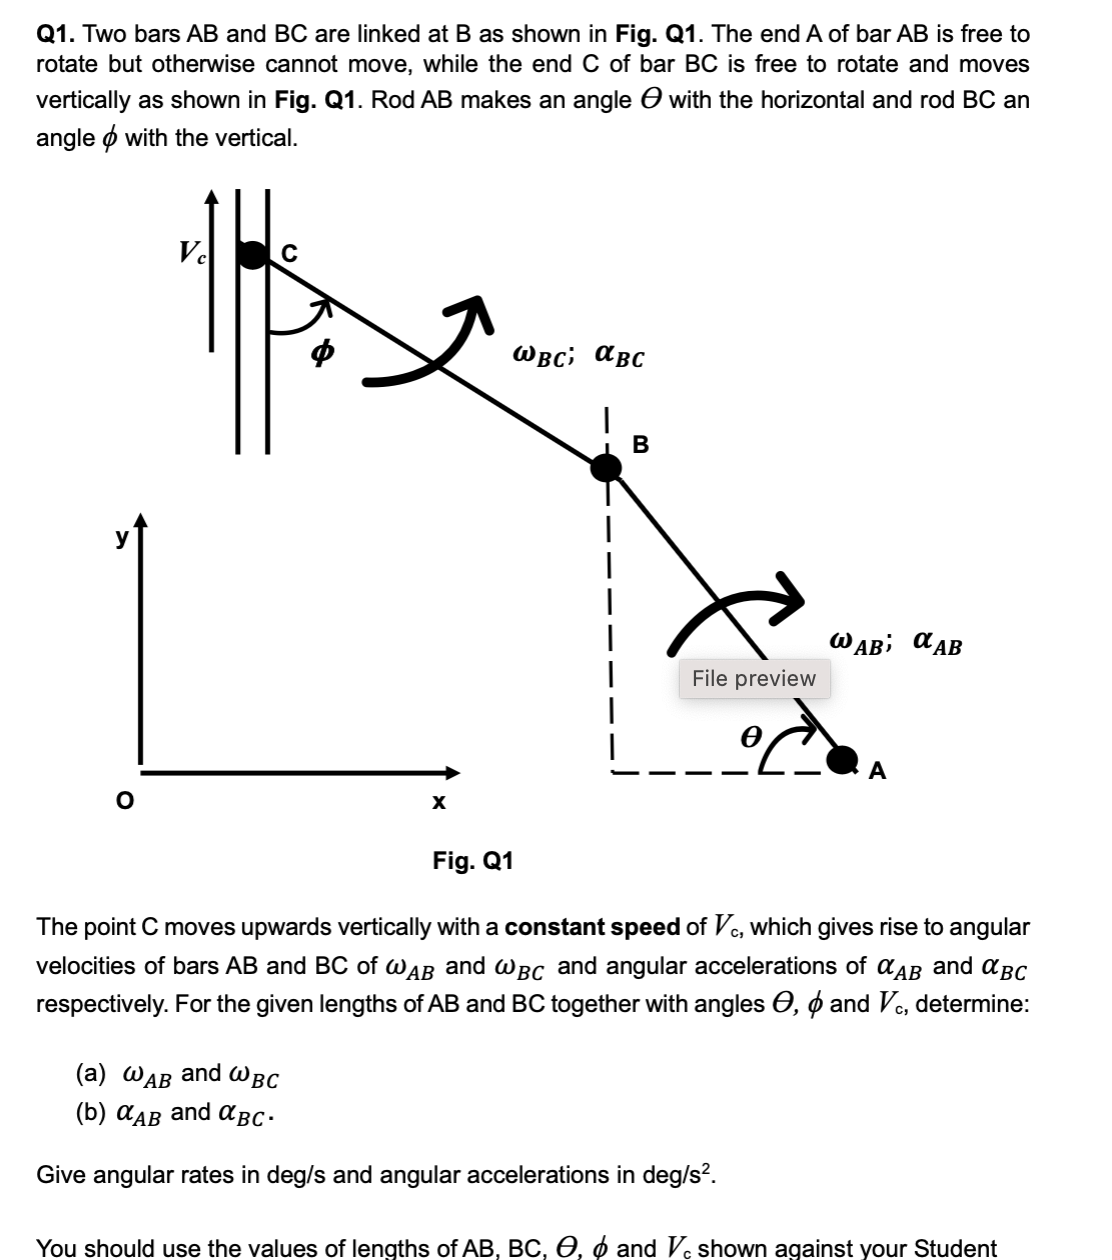 Q1. Two bars AB and BC are linked at B as shown in Fig. Q1. The end A of bar AB is free to
rotate but otherwise cannot move, while the end C of bar BC is free to rotate and moves
vertically as shown in Fig. Q1. Rod AB makes an angle ● with the horizontal and rod BC an
angle with the vertical.
Vc
WBC; αBC
|
B
WAB α AB
File preview
A
Fig. Q1
The point C moves upwards vertically with a constant speed of Vc, which gives rise to angular
velocities of bars AB and BC of WAB and WBC and angular accelerations of αAB and αBC
respectively. For the given lengths of AB and BC together with angles Є, & and Vc, determine:
(a) WAB and WBC
(b) αAB and αBC.
Give angular rates in deg/s and angular accelerations in deg/s².
You should use the values of lengths of AB, BC, O, ☀ and Vc shown against your Student